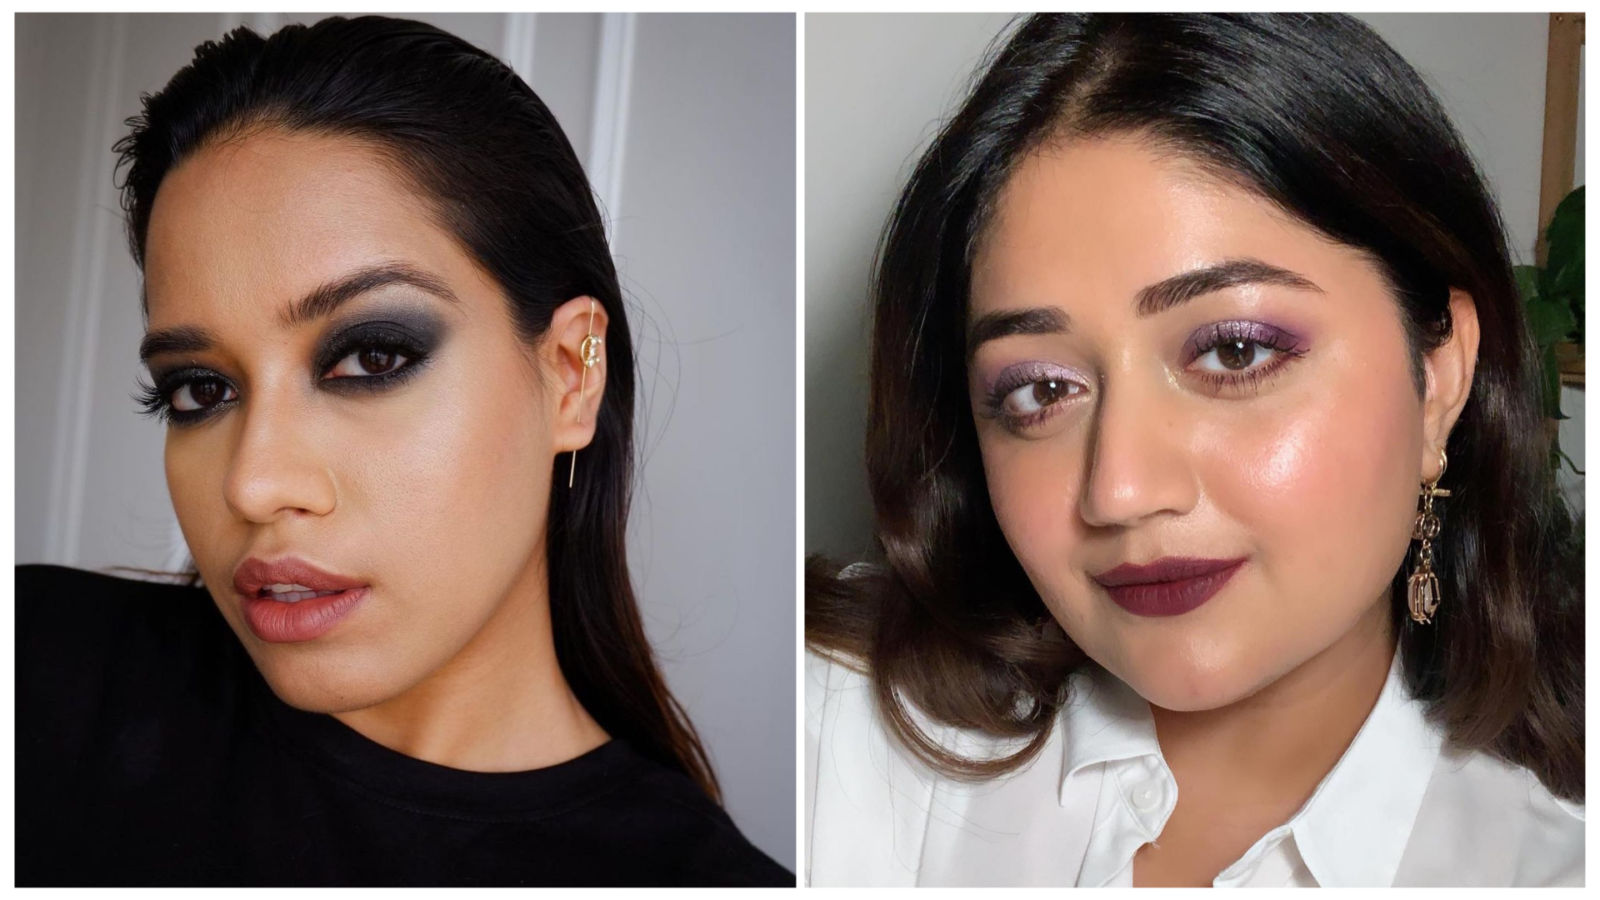 Get inspired by these head turning makeup looks for New Year's Eve